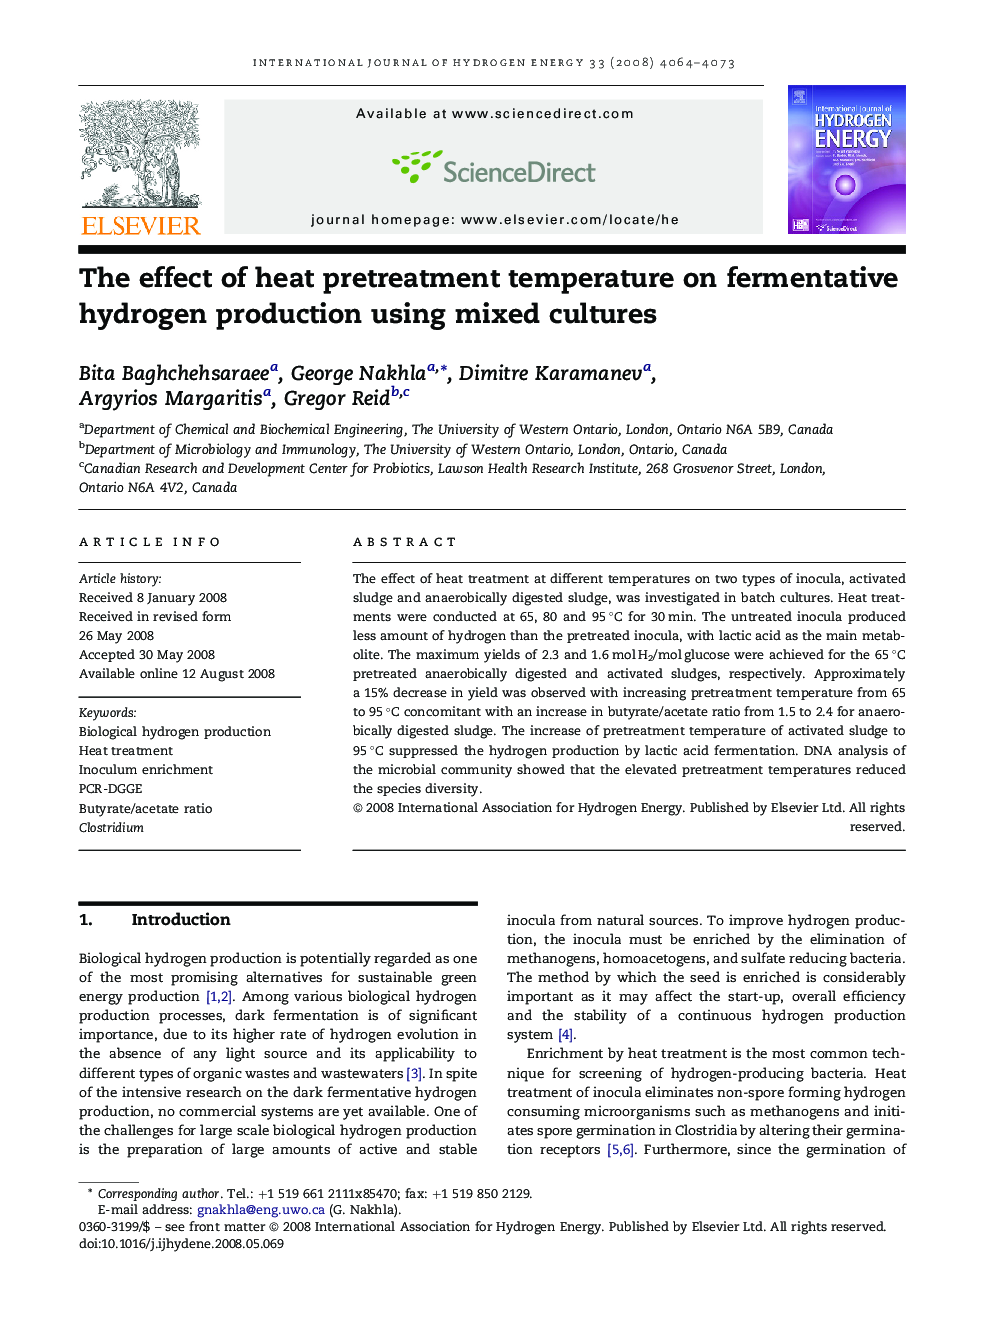 The effect of heat pretreatment temperature on fermentative hydrogen production using mixed cultures